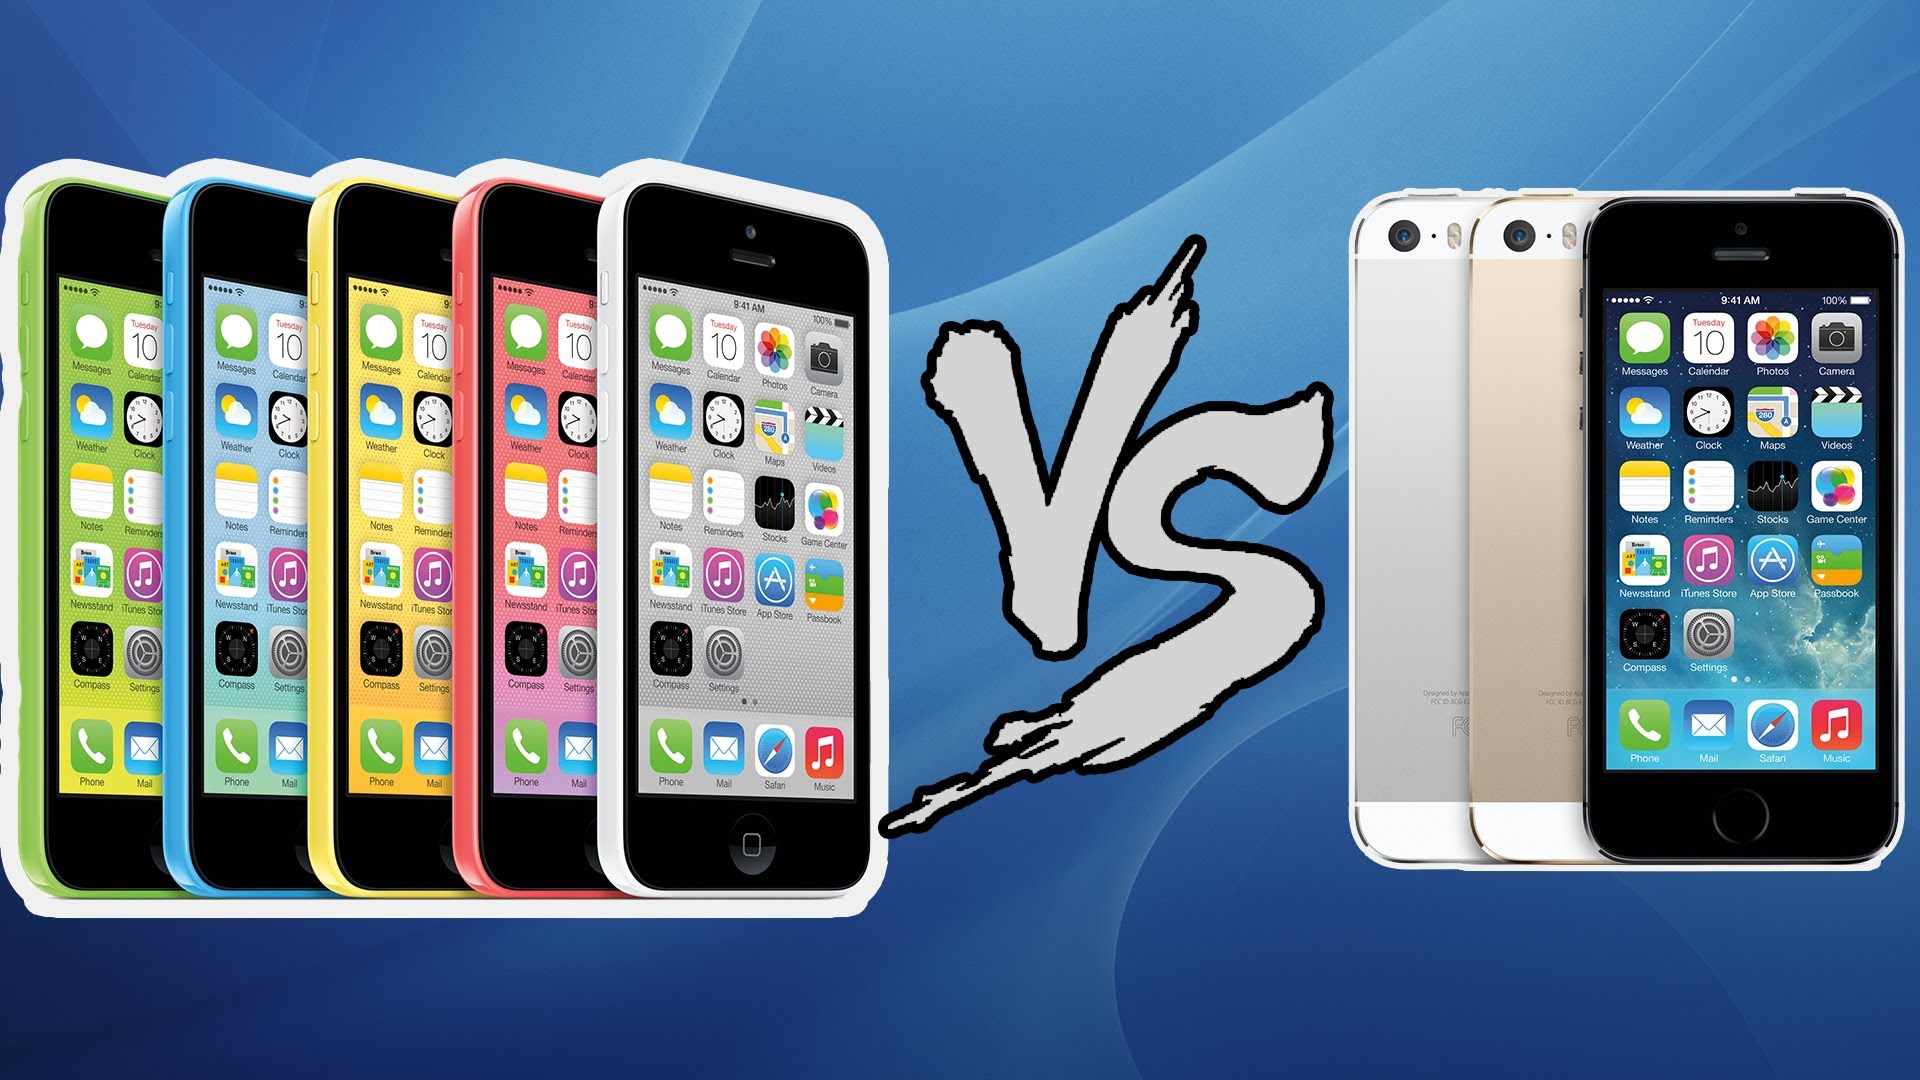 iPhone 5c VS iPhone 5s: Which one should you get?